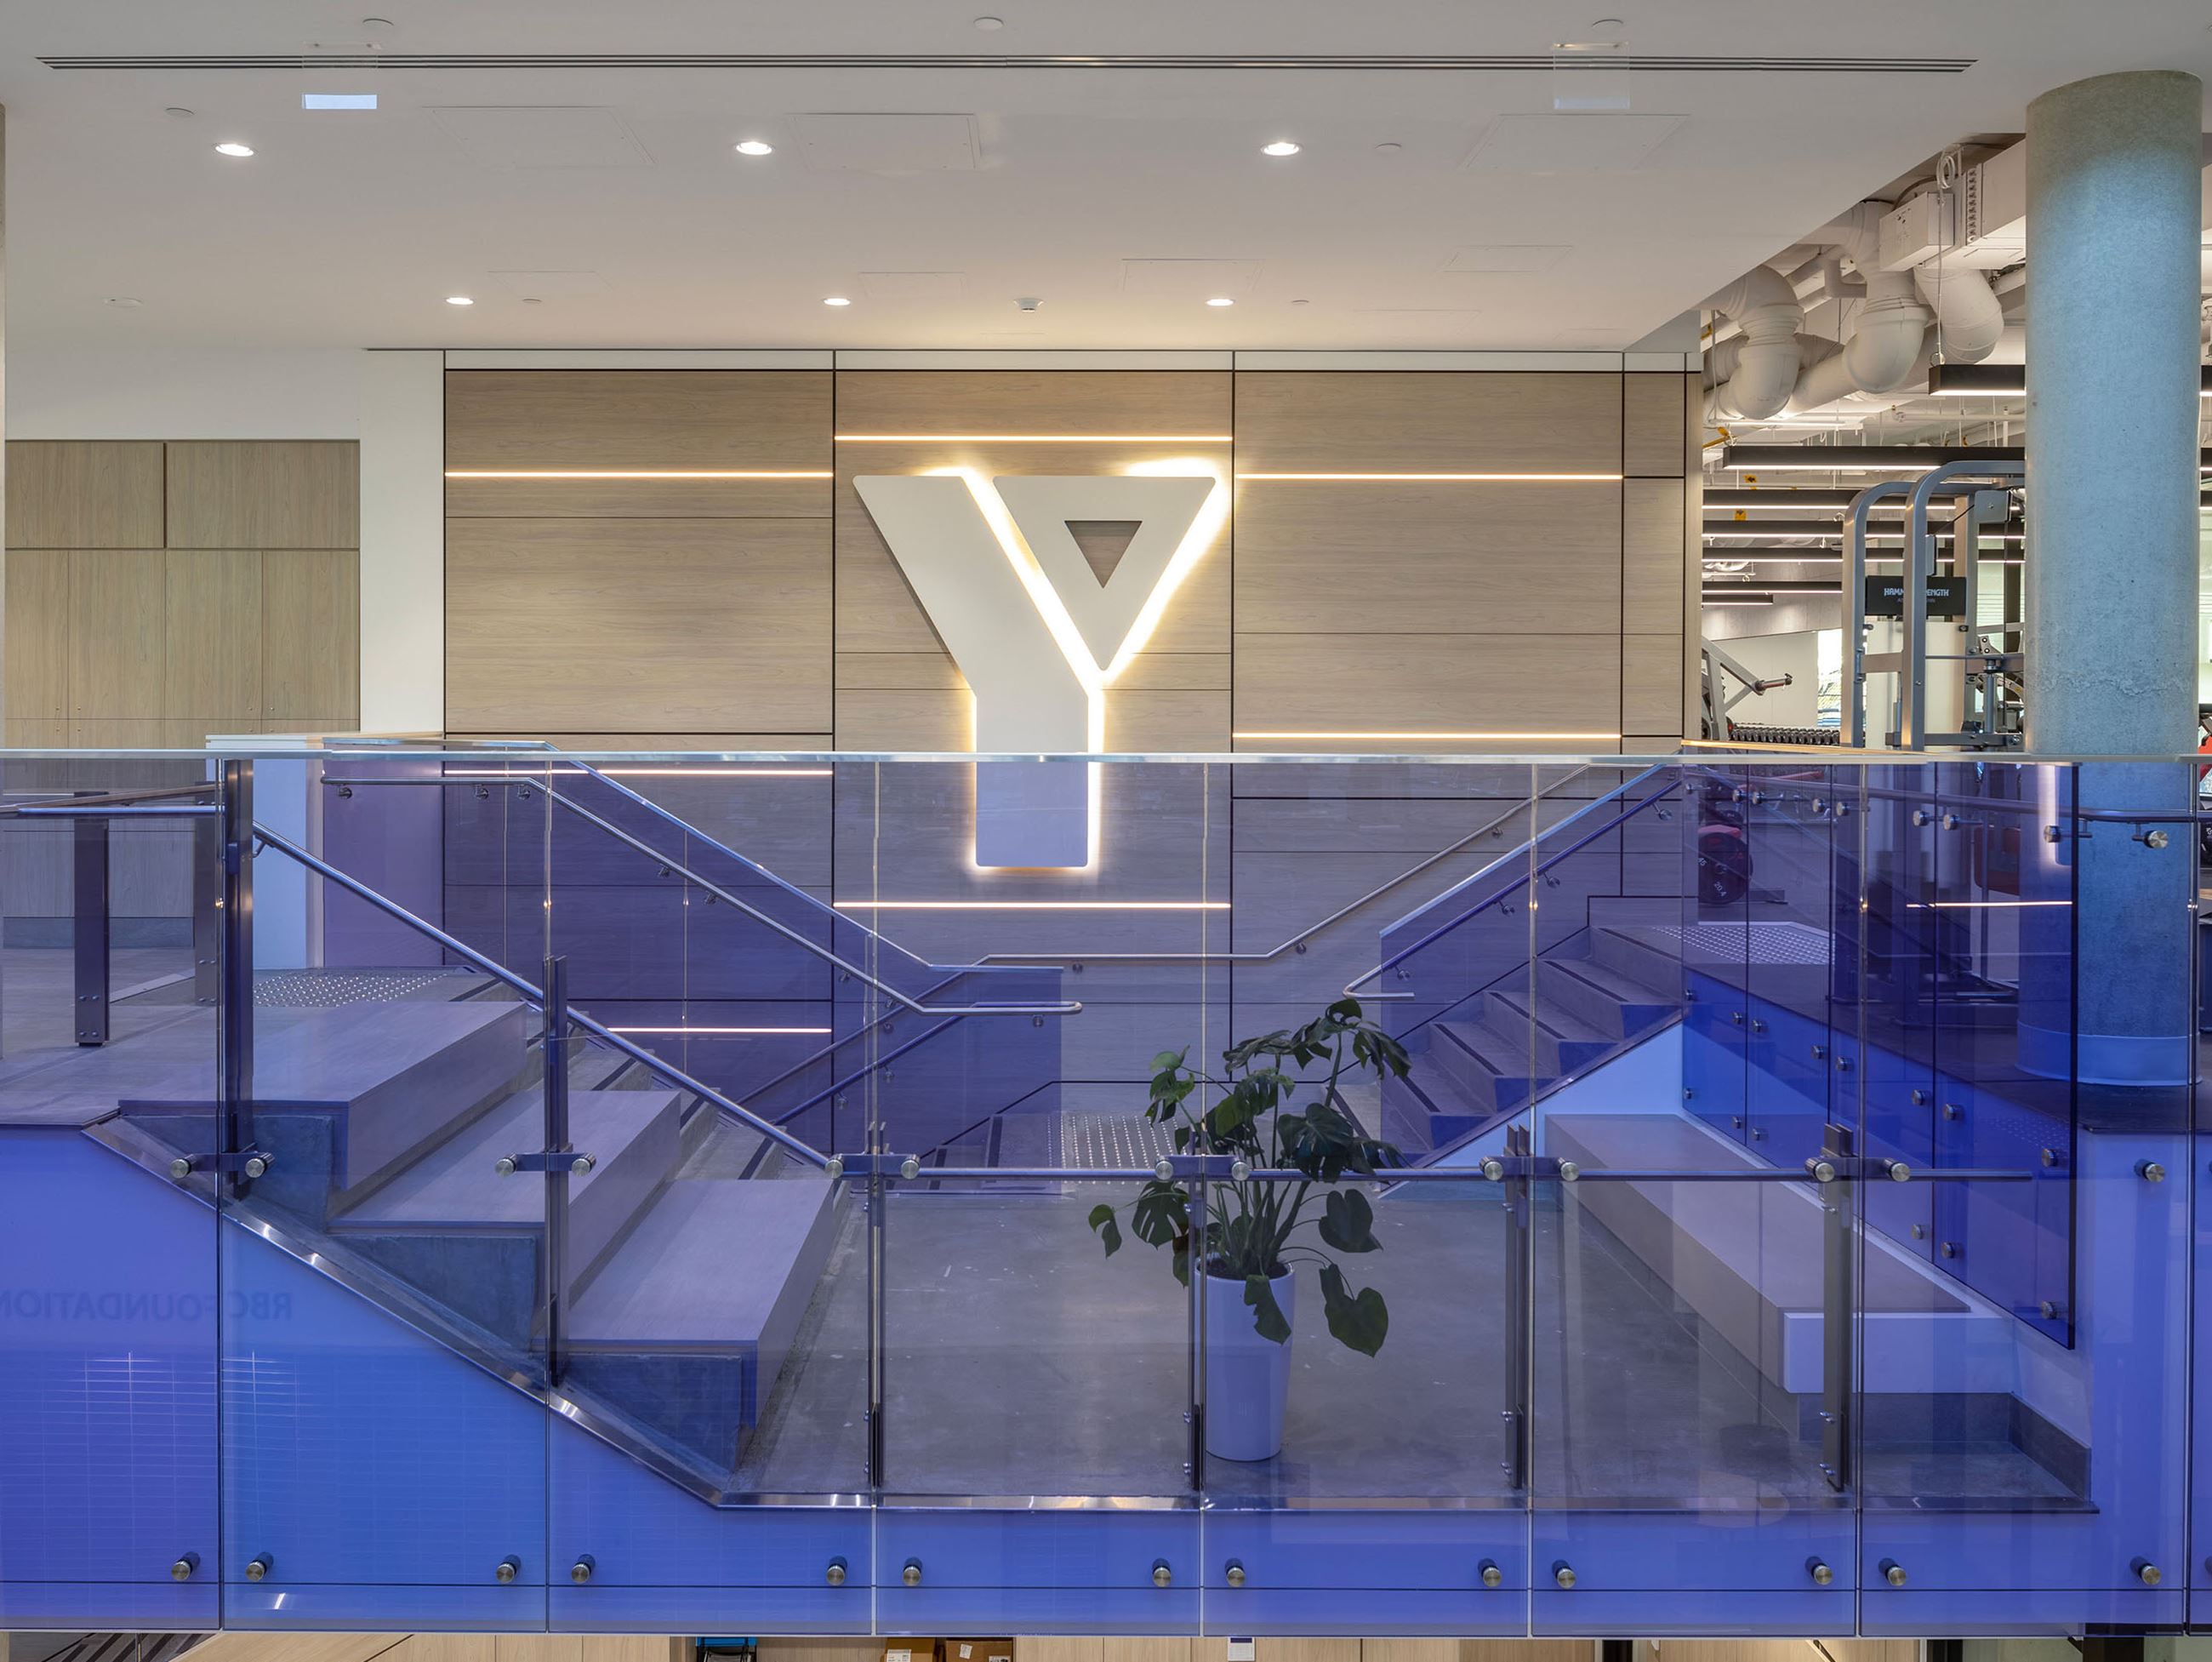 The main staircase in the Bettie Allard YMCA with the Y logo showing on the wall